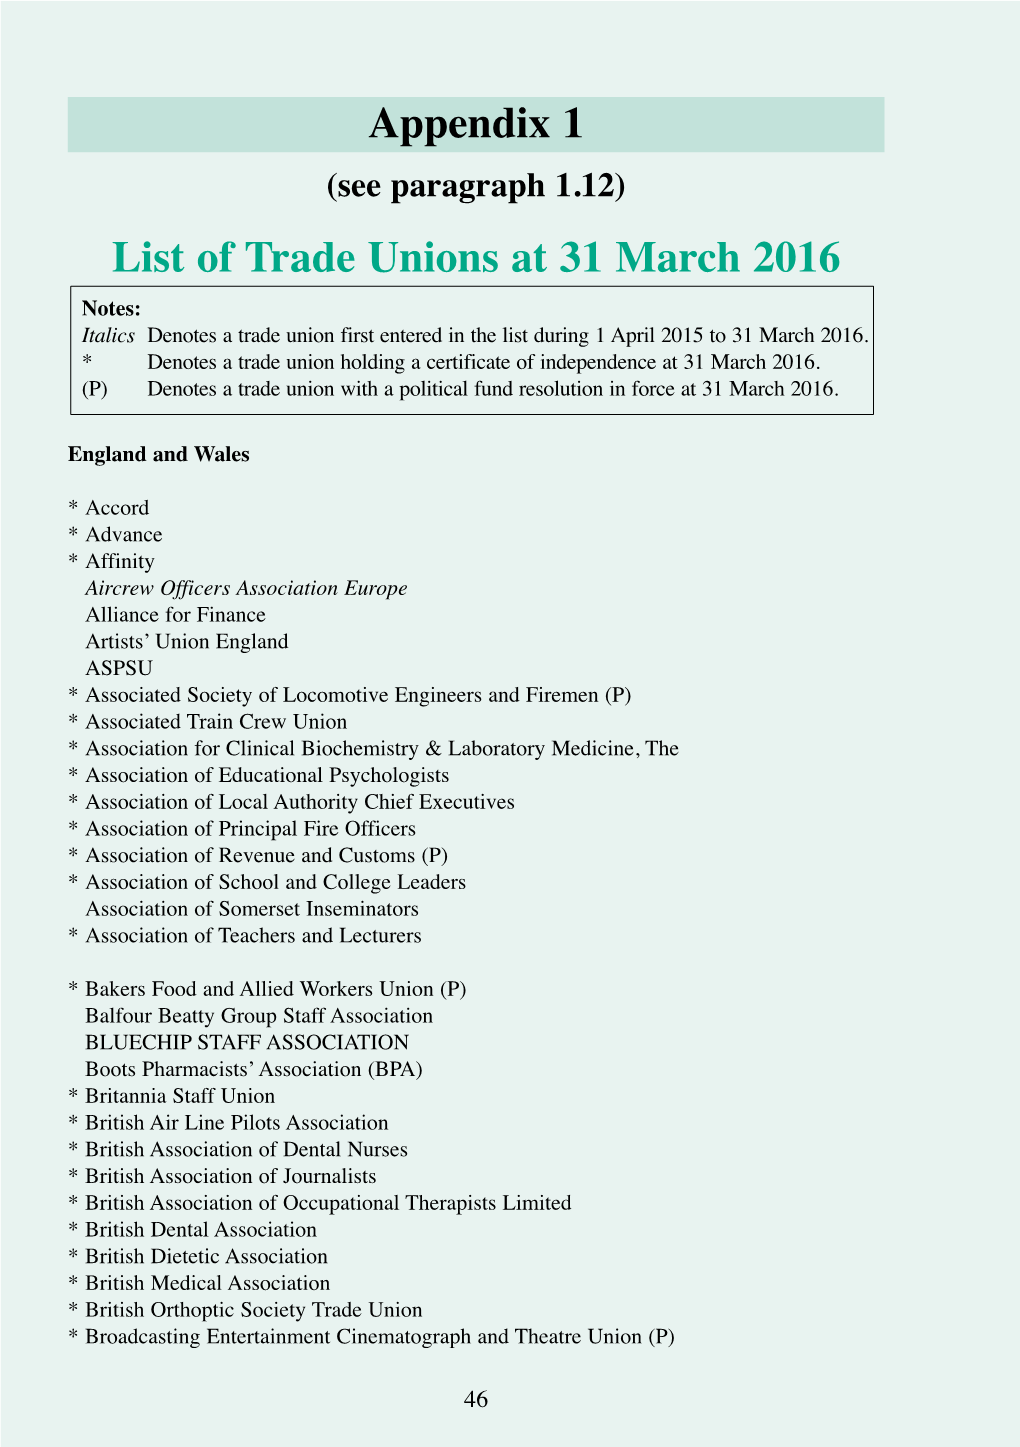 List of Trade Unions at 31 March 2016 Appendix 1